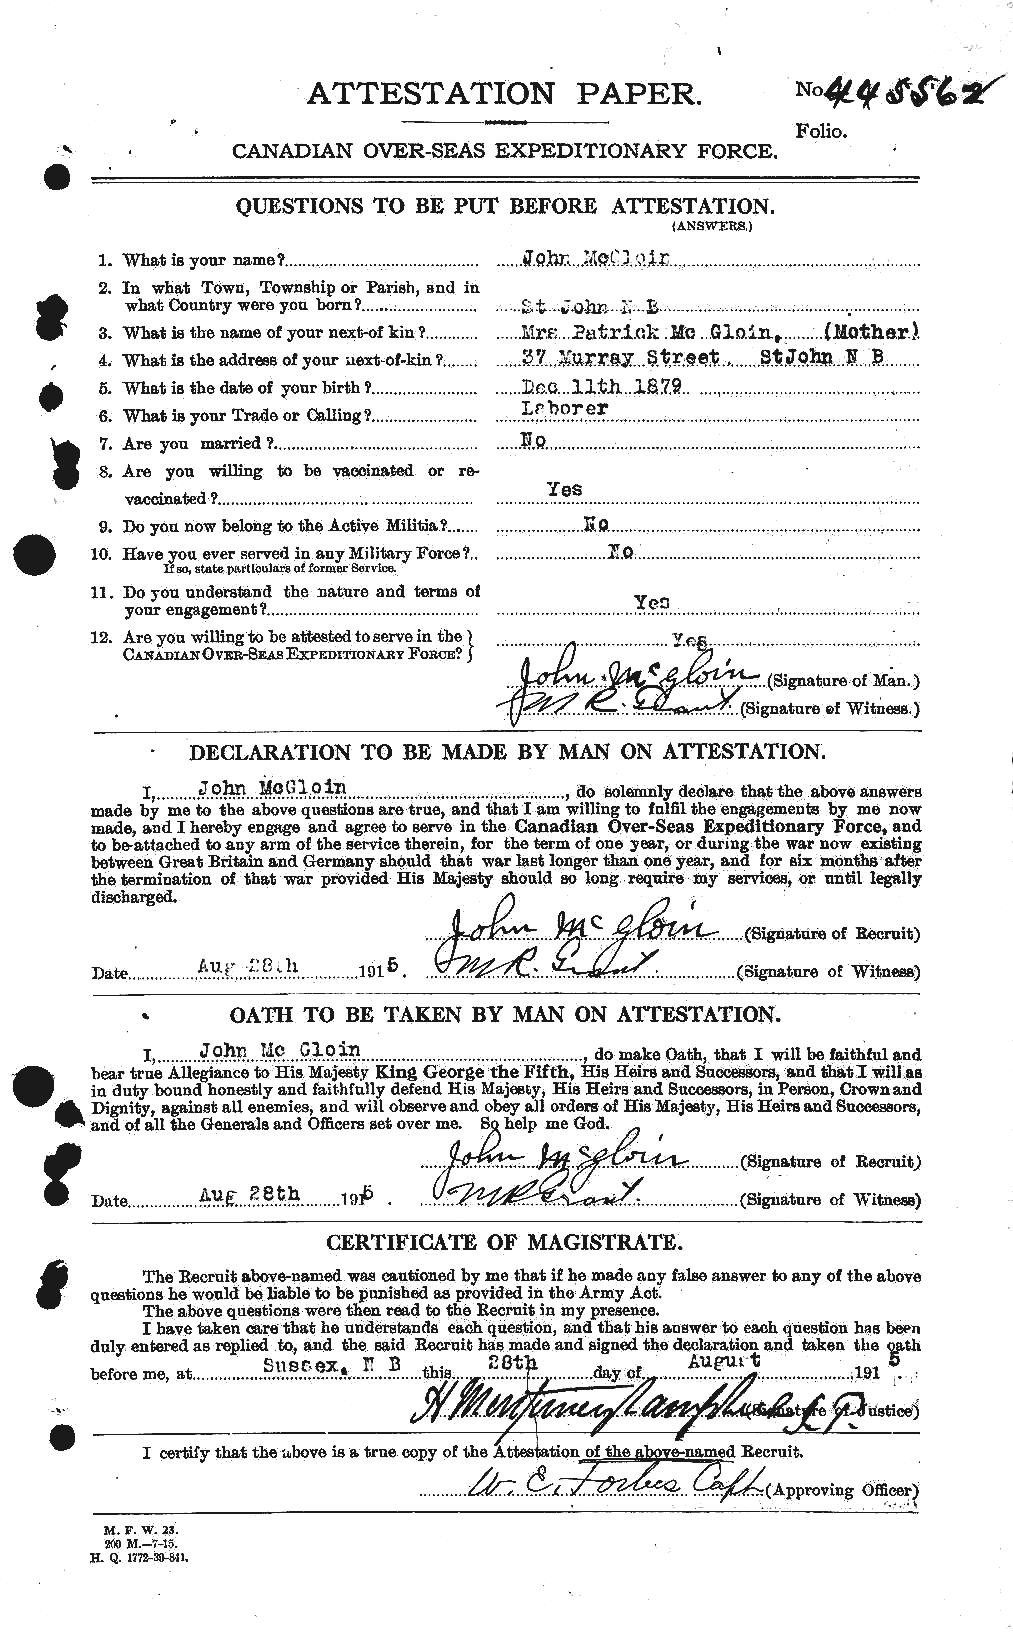 Personnel Records of the First World War - CEF 528451a